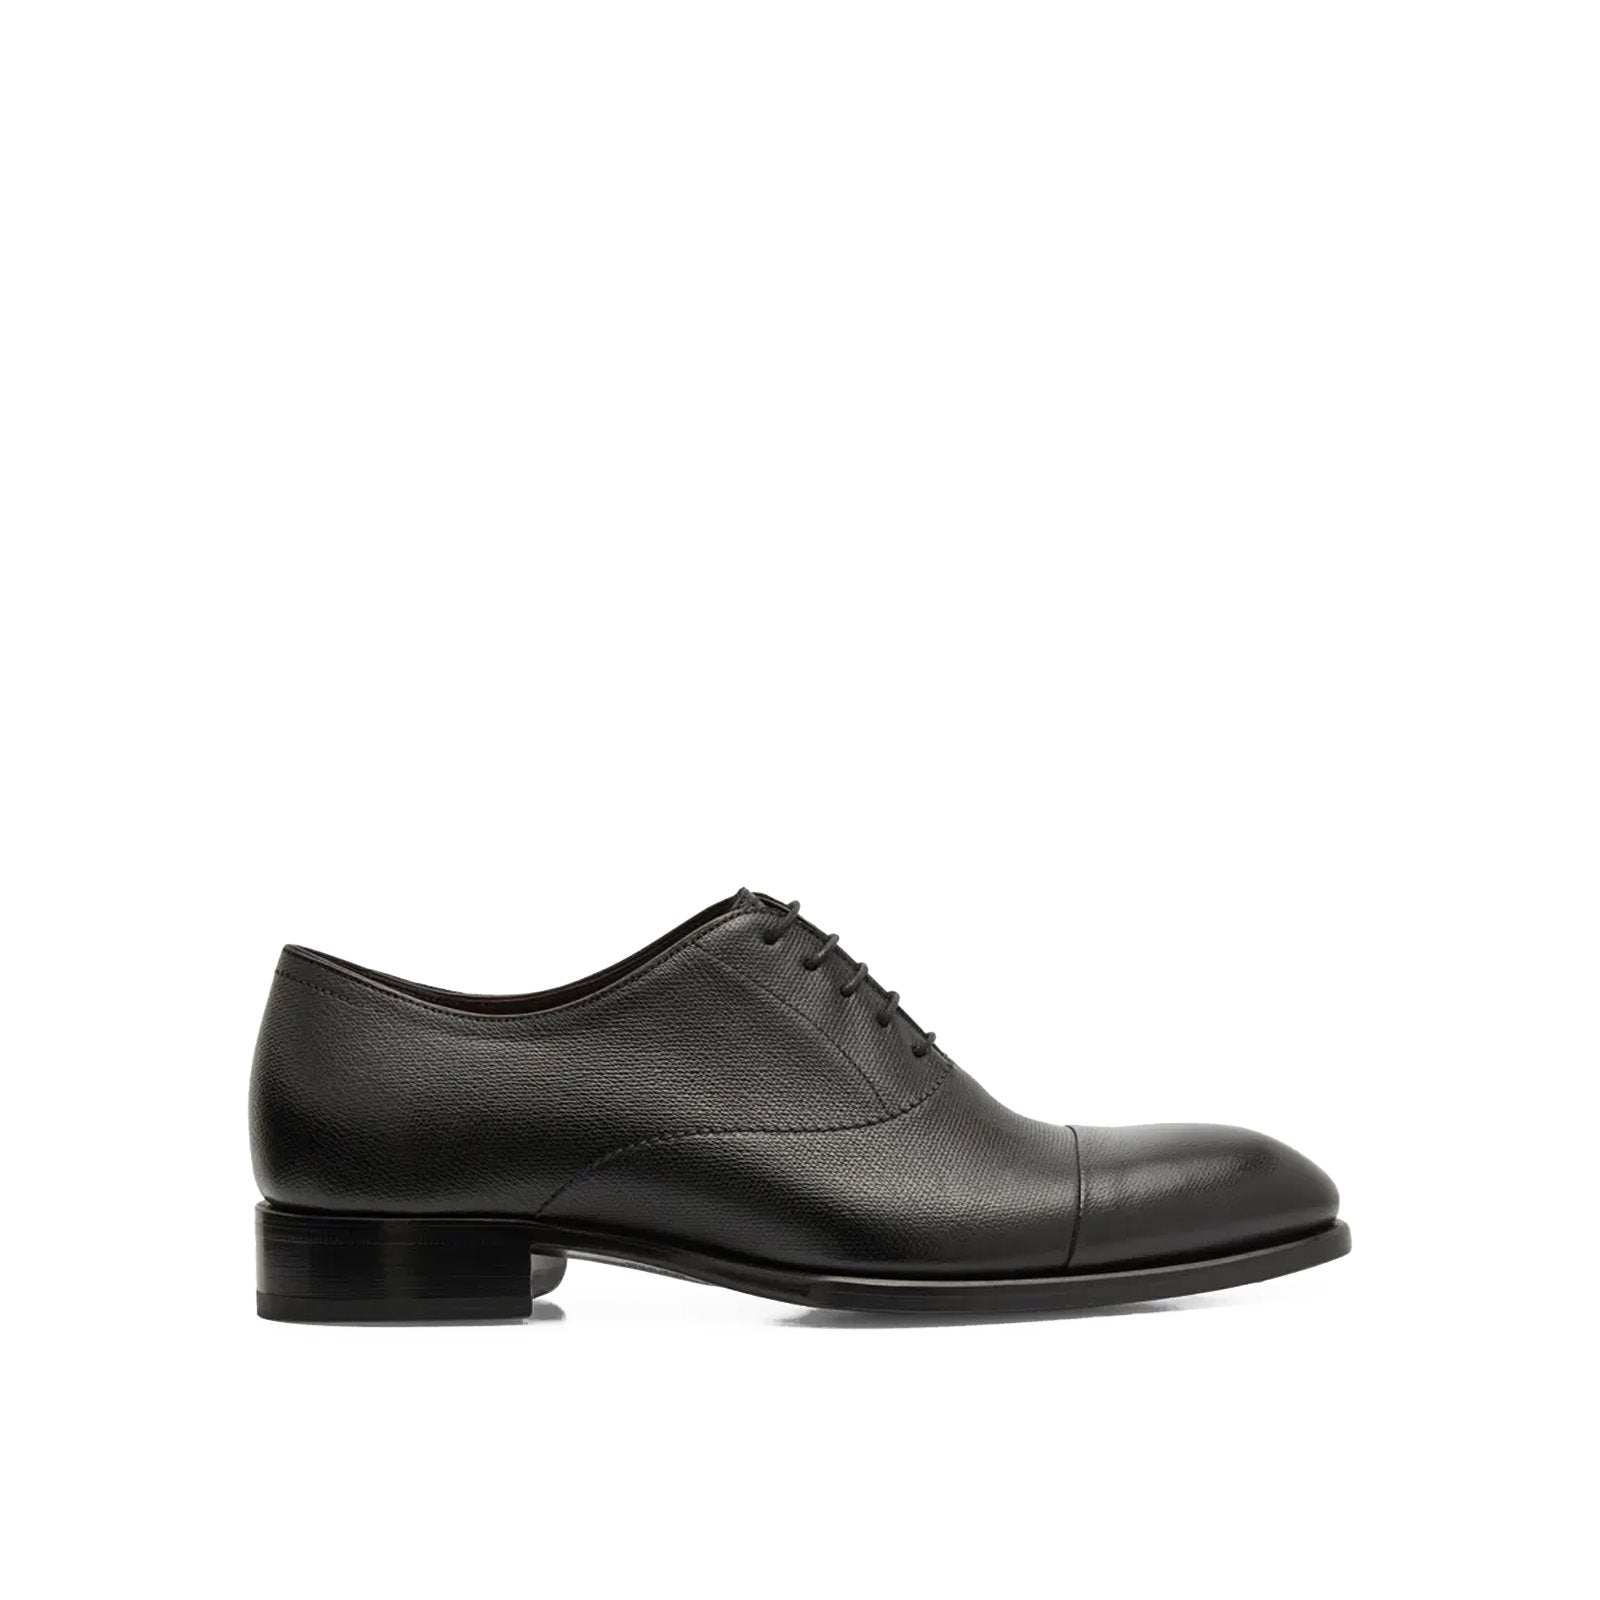 Leather cap toe oxford shoes